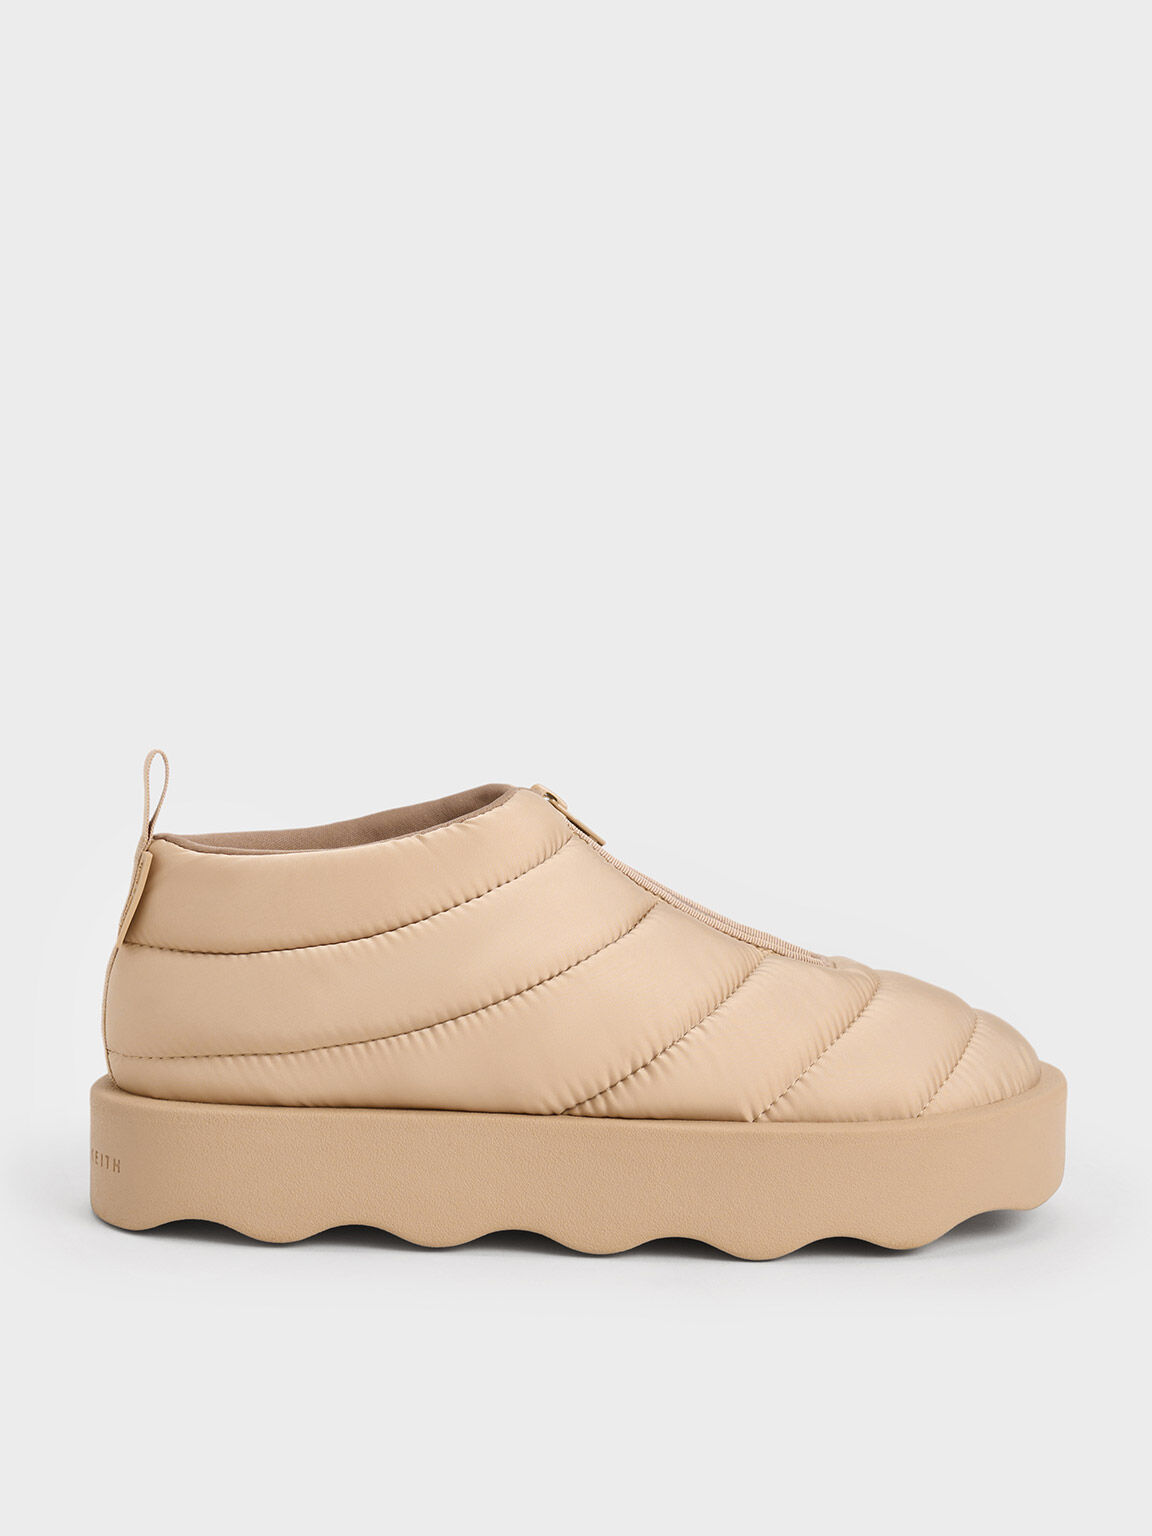 Puffy Nylon Panelled Sneakers, Nude, hi-res